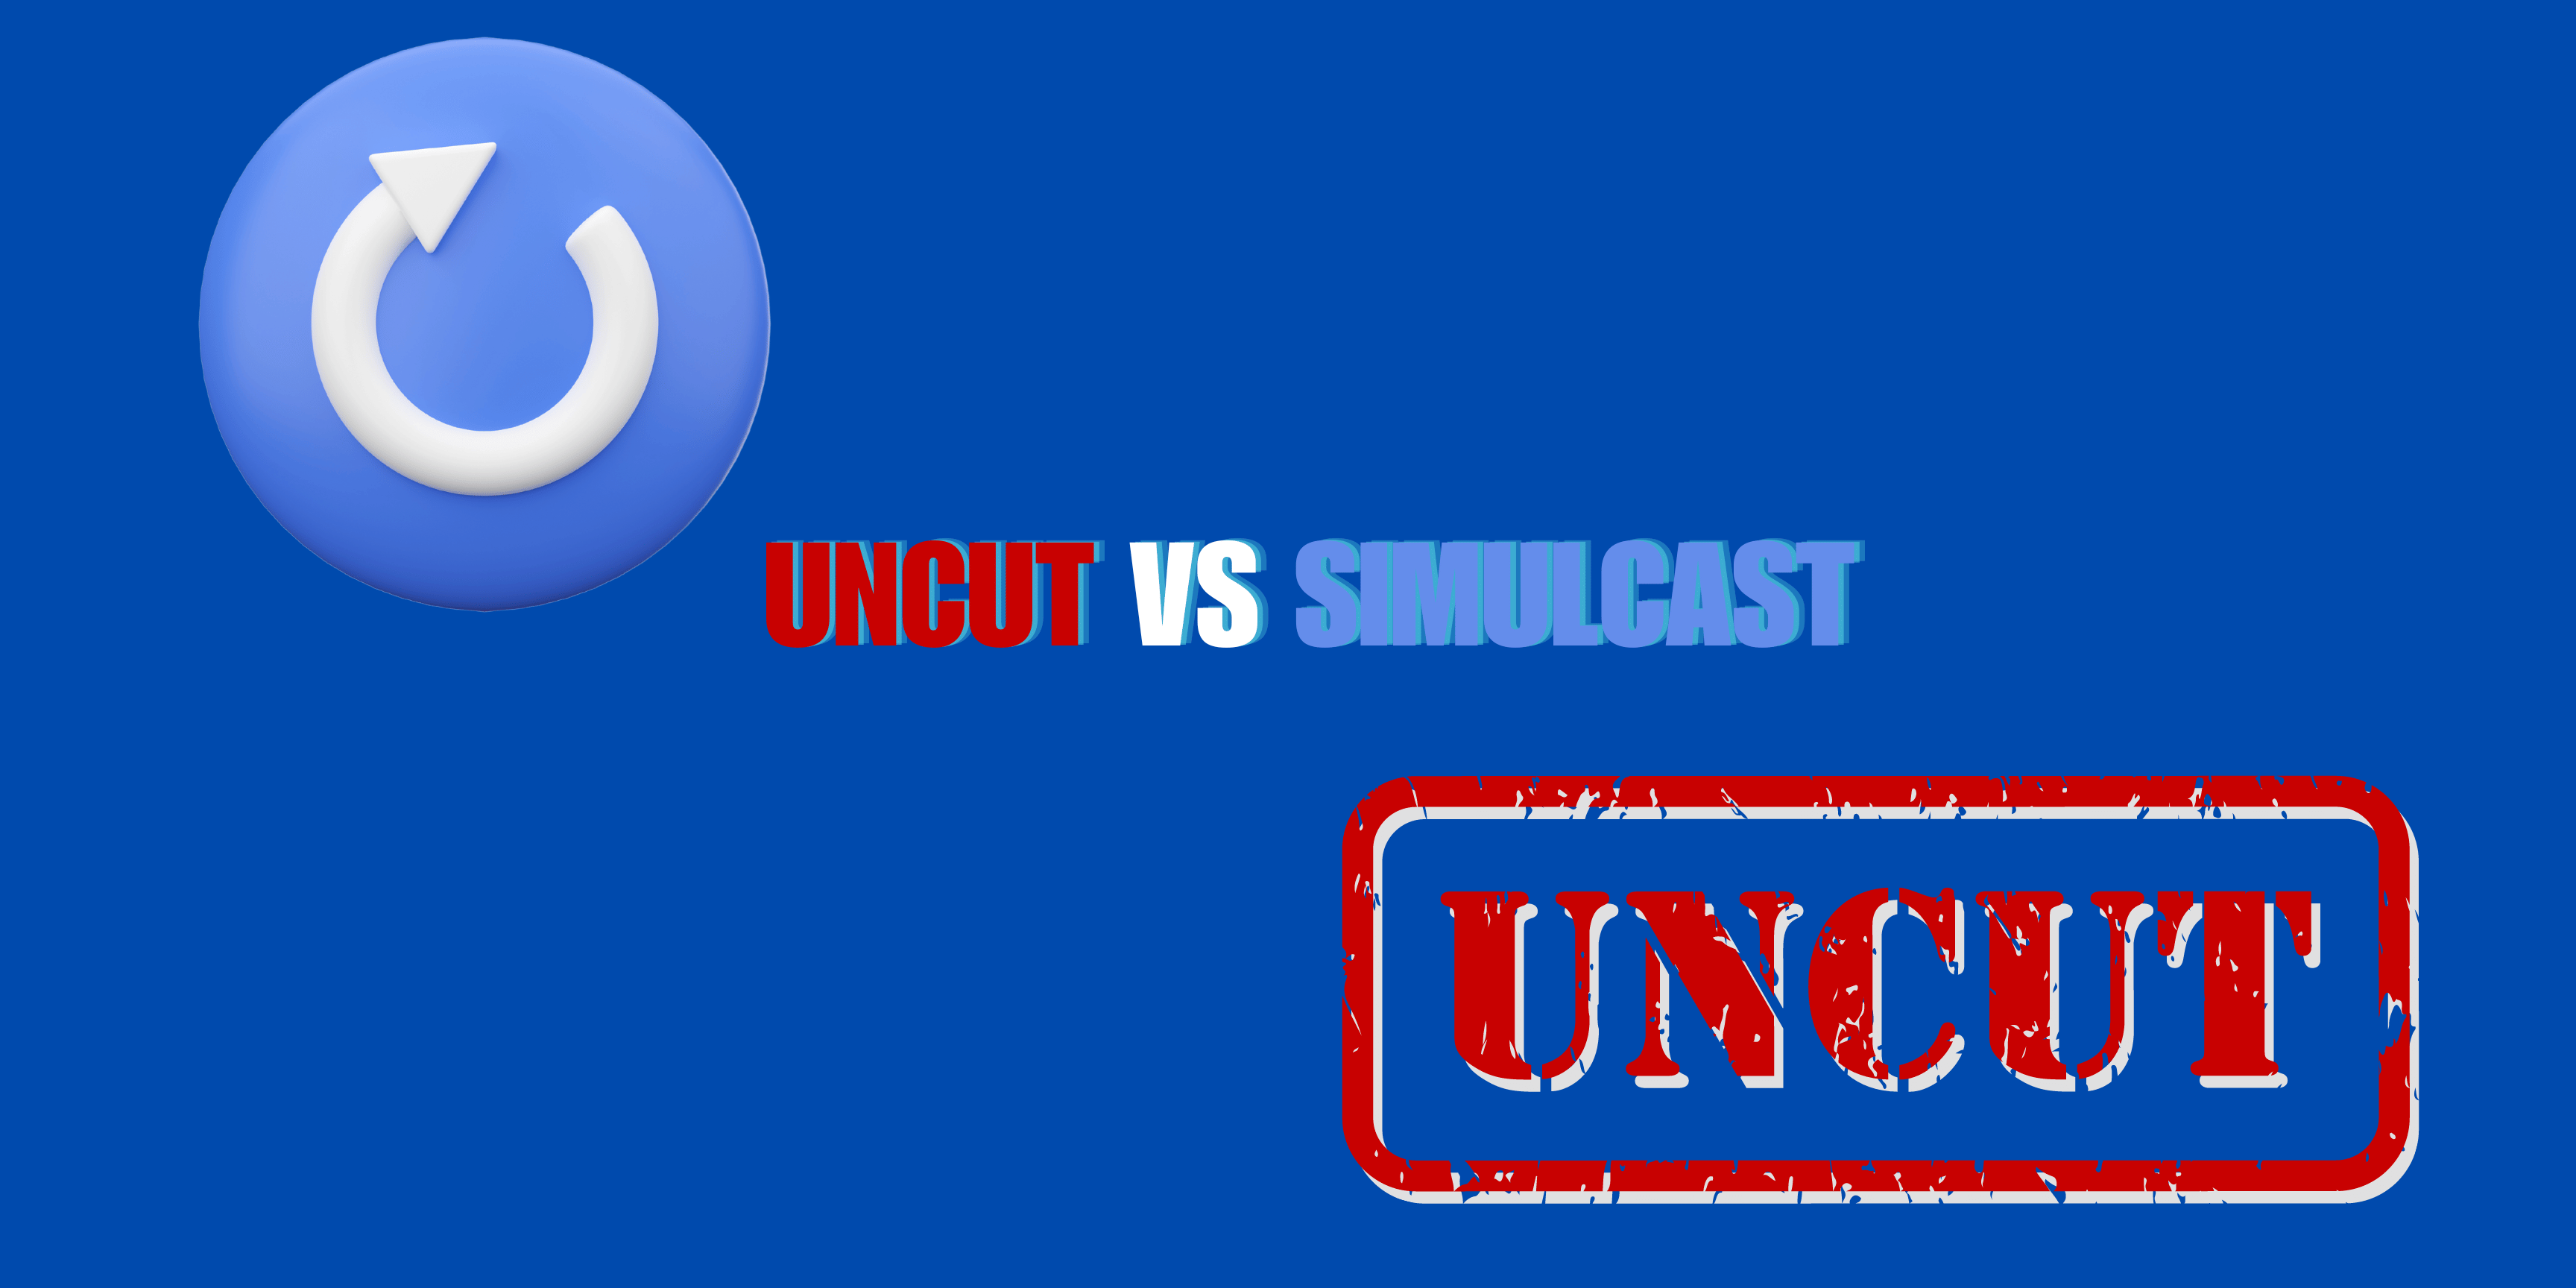 Difference between Simulcast and Uncut anime